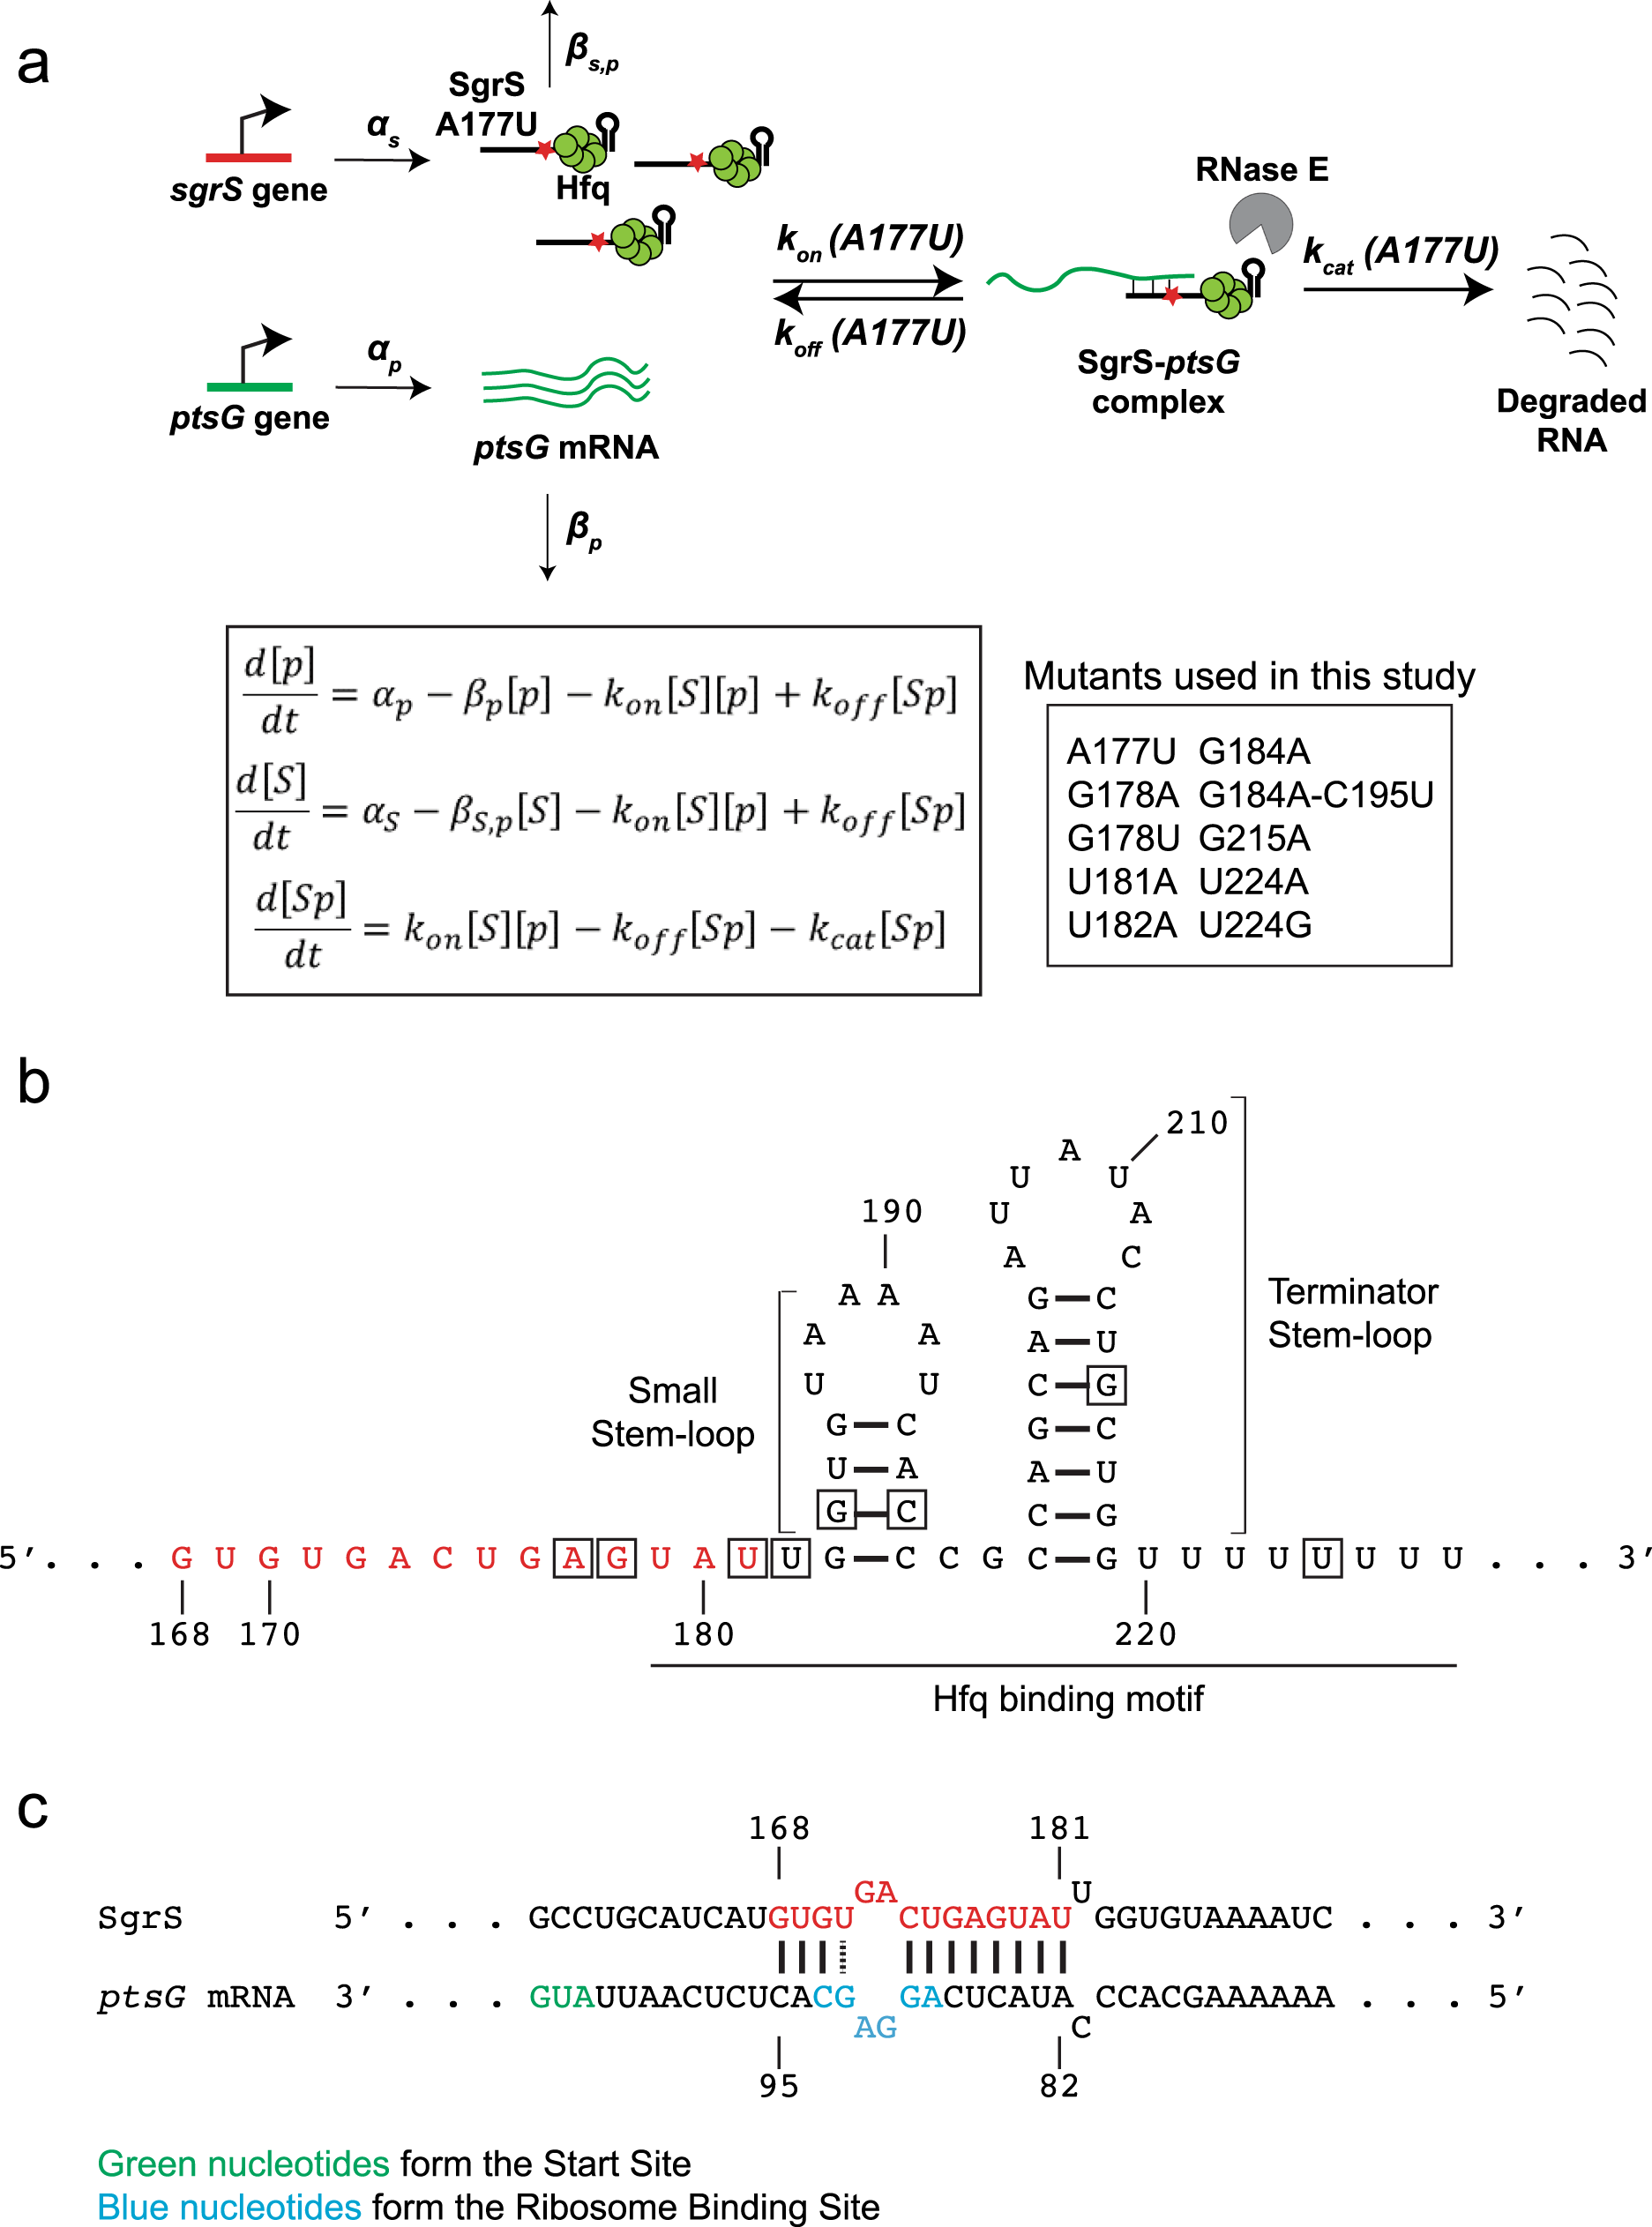 Effects of individual base-pairs on in vivo target search and destruction  kinetics of bacterial small RNA | Nature Communications